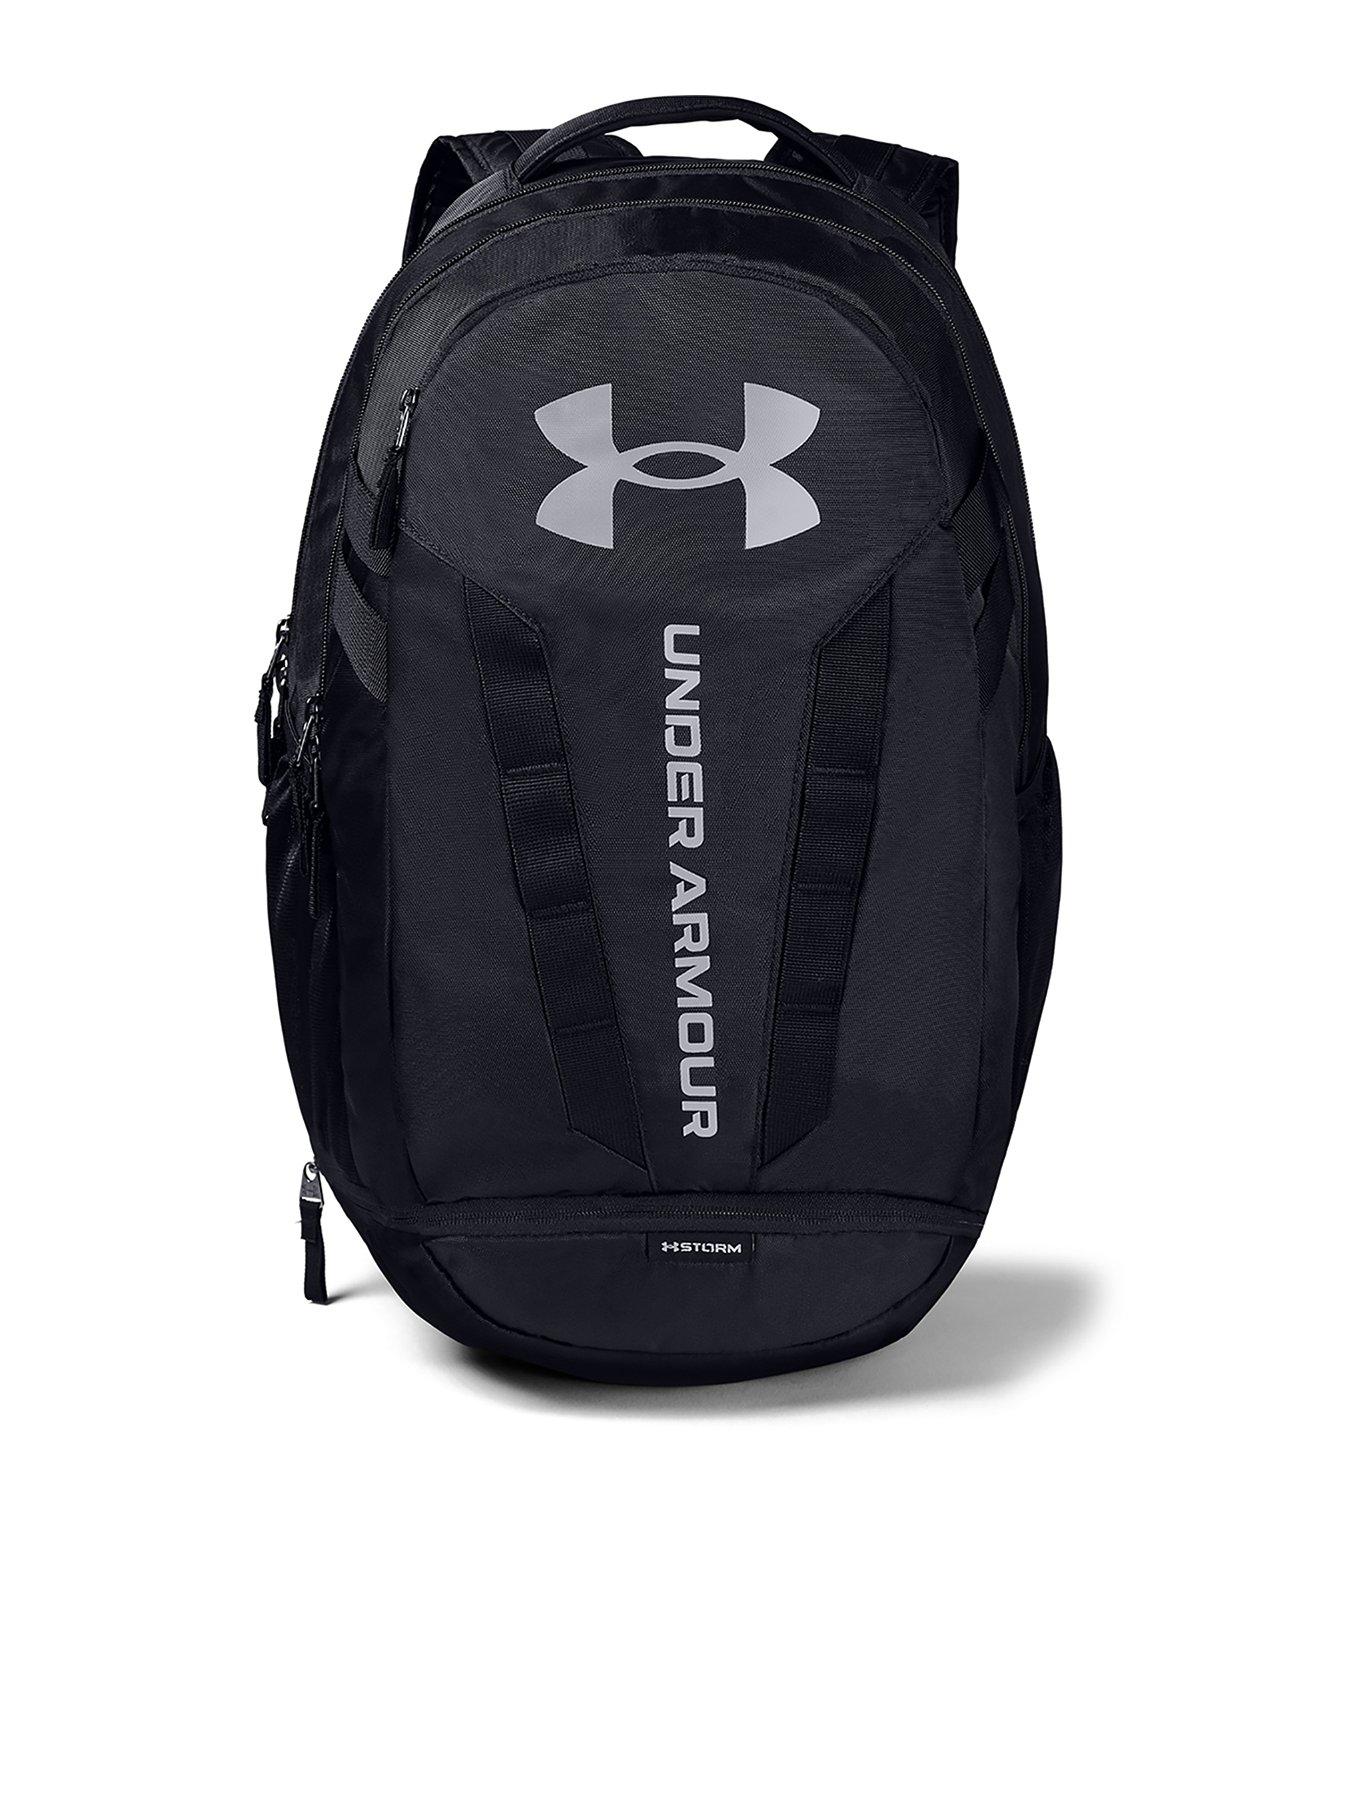 hobby zwavel Azië Under armour | Bags & backpacks | Sports & leisure | www.very.co.uk